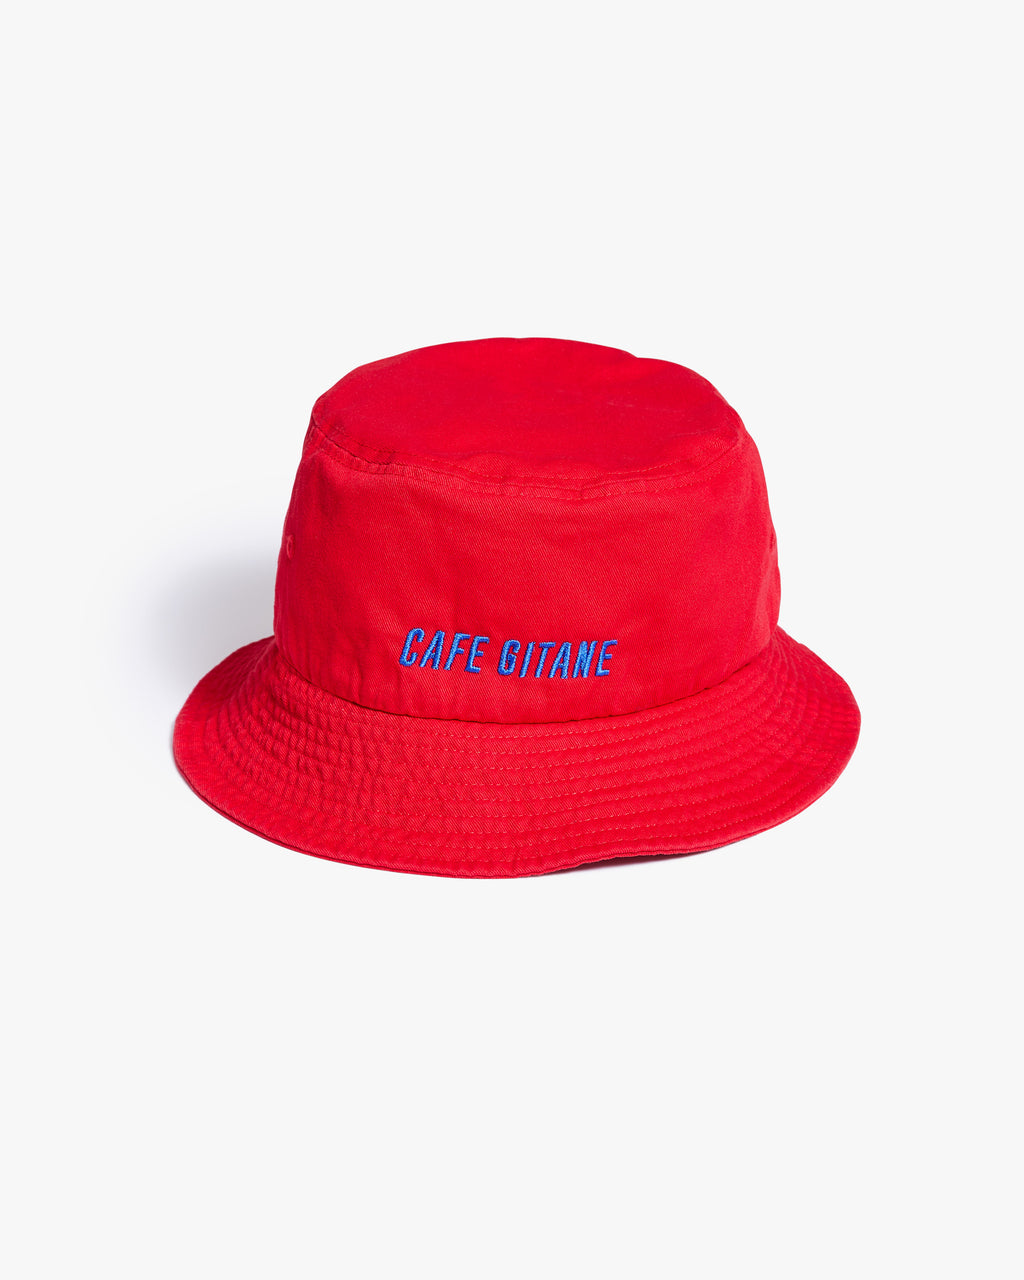 The red Cafe Gitane NYC Bucket Hat is made of 100% Bio-Washed Cotton Chino Twill and embroidered with royal blue thread. The tag and Jimi Hendrix quote is printed inside and the eyelets are sewn to which is more eco-friendly. One Size Fits All.